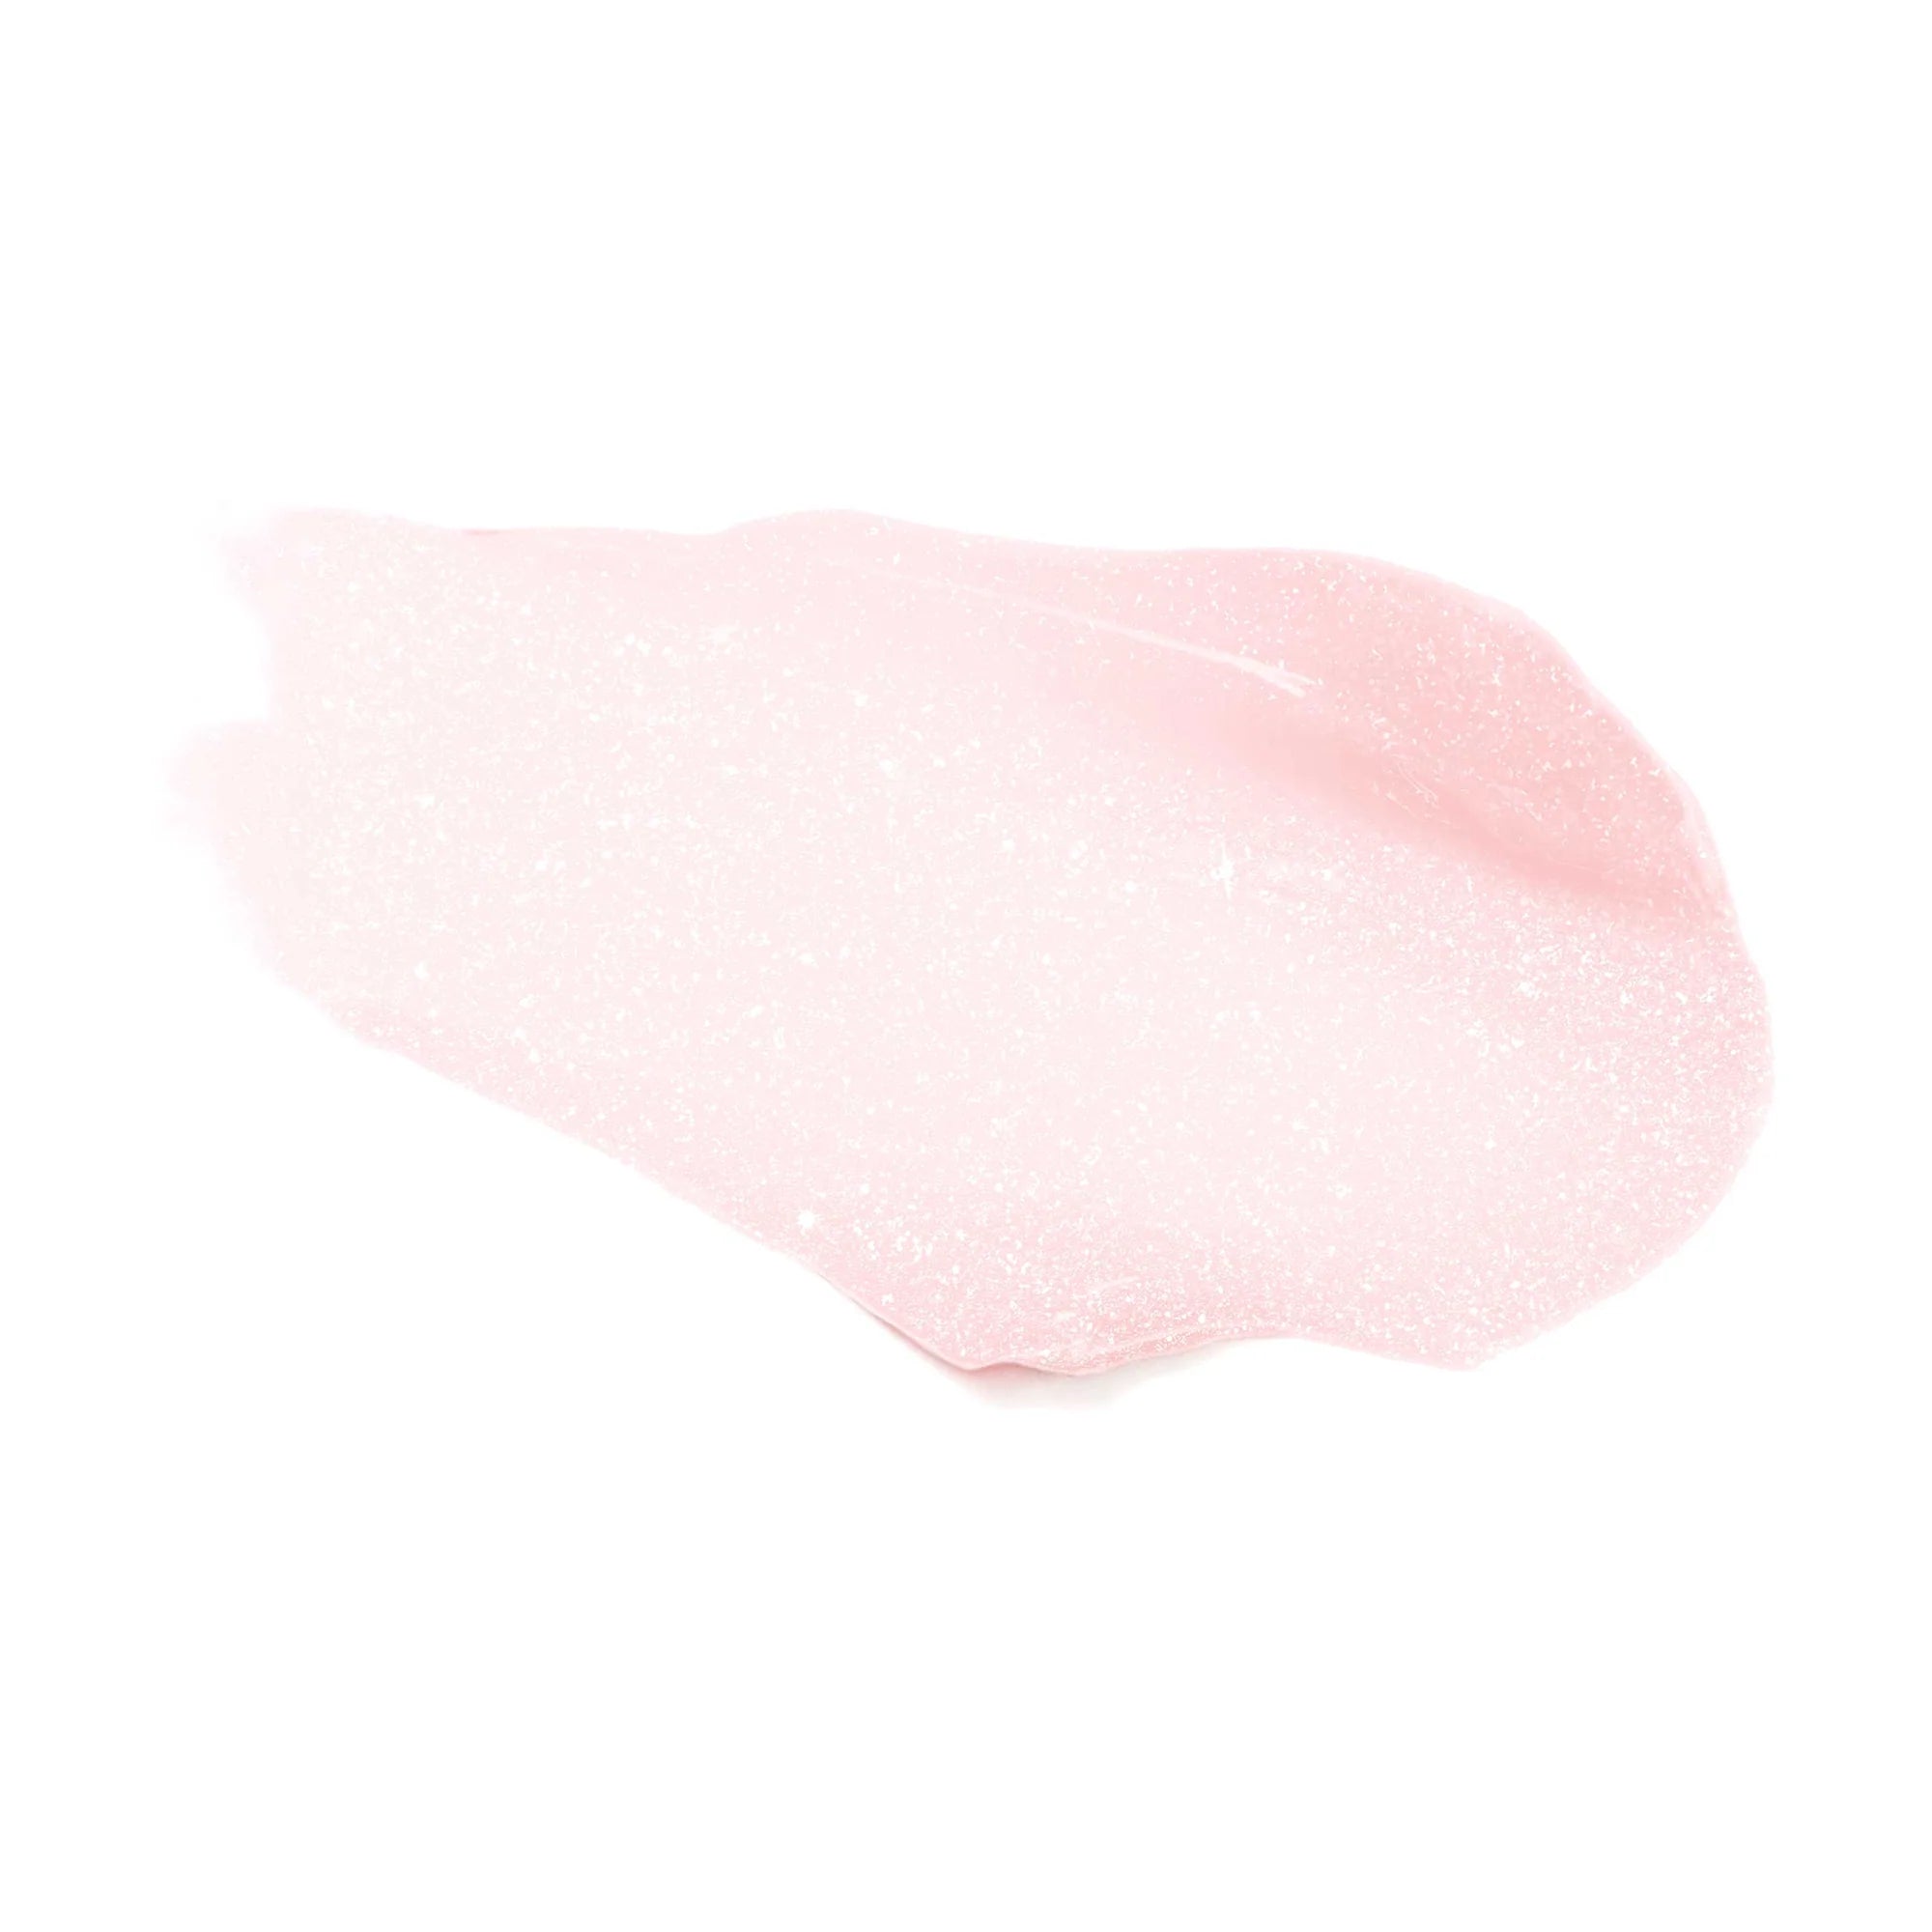 Jane Iredale's HydroPure™ Hyaluronic Lip Gloss - shade Snow Berry - shimmering silver pink